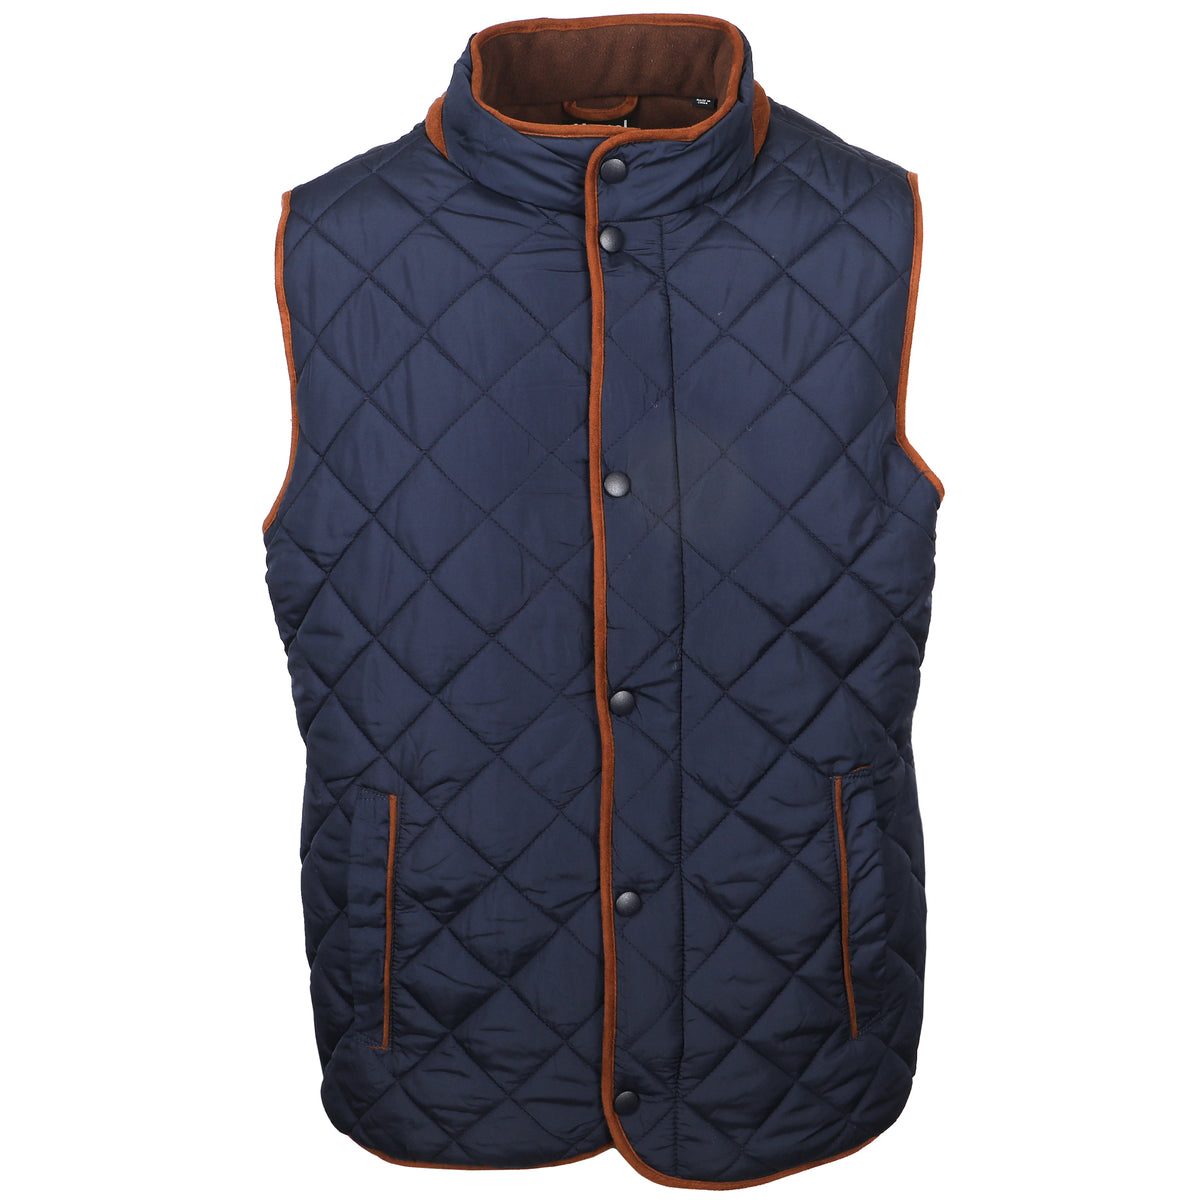 Saturday morning to Saturday night, The Sportsman was designed with interior pockets for all your gear. Get ready for sports and good times!   100% Polyester Vest  •  Quilted Shell &amp; Warm Fleece Interior  •  Full Front Zip with Snap Button Closure  •  Four Inside Pockets  •  Machine Wash - lay flat or hang to dry  •  Imported